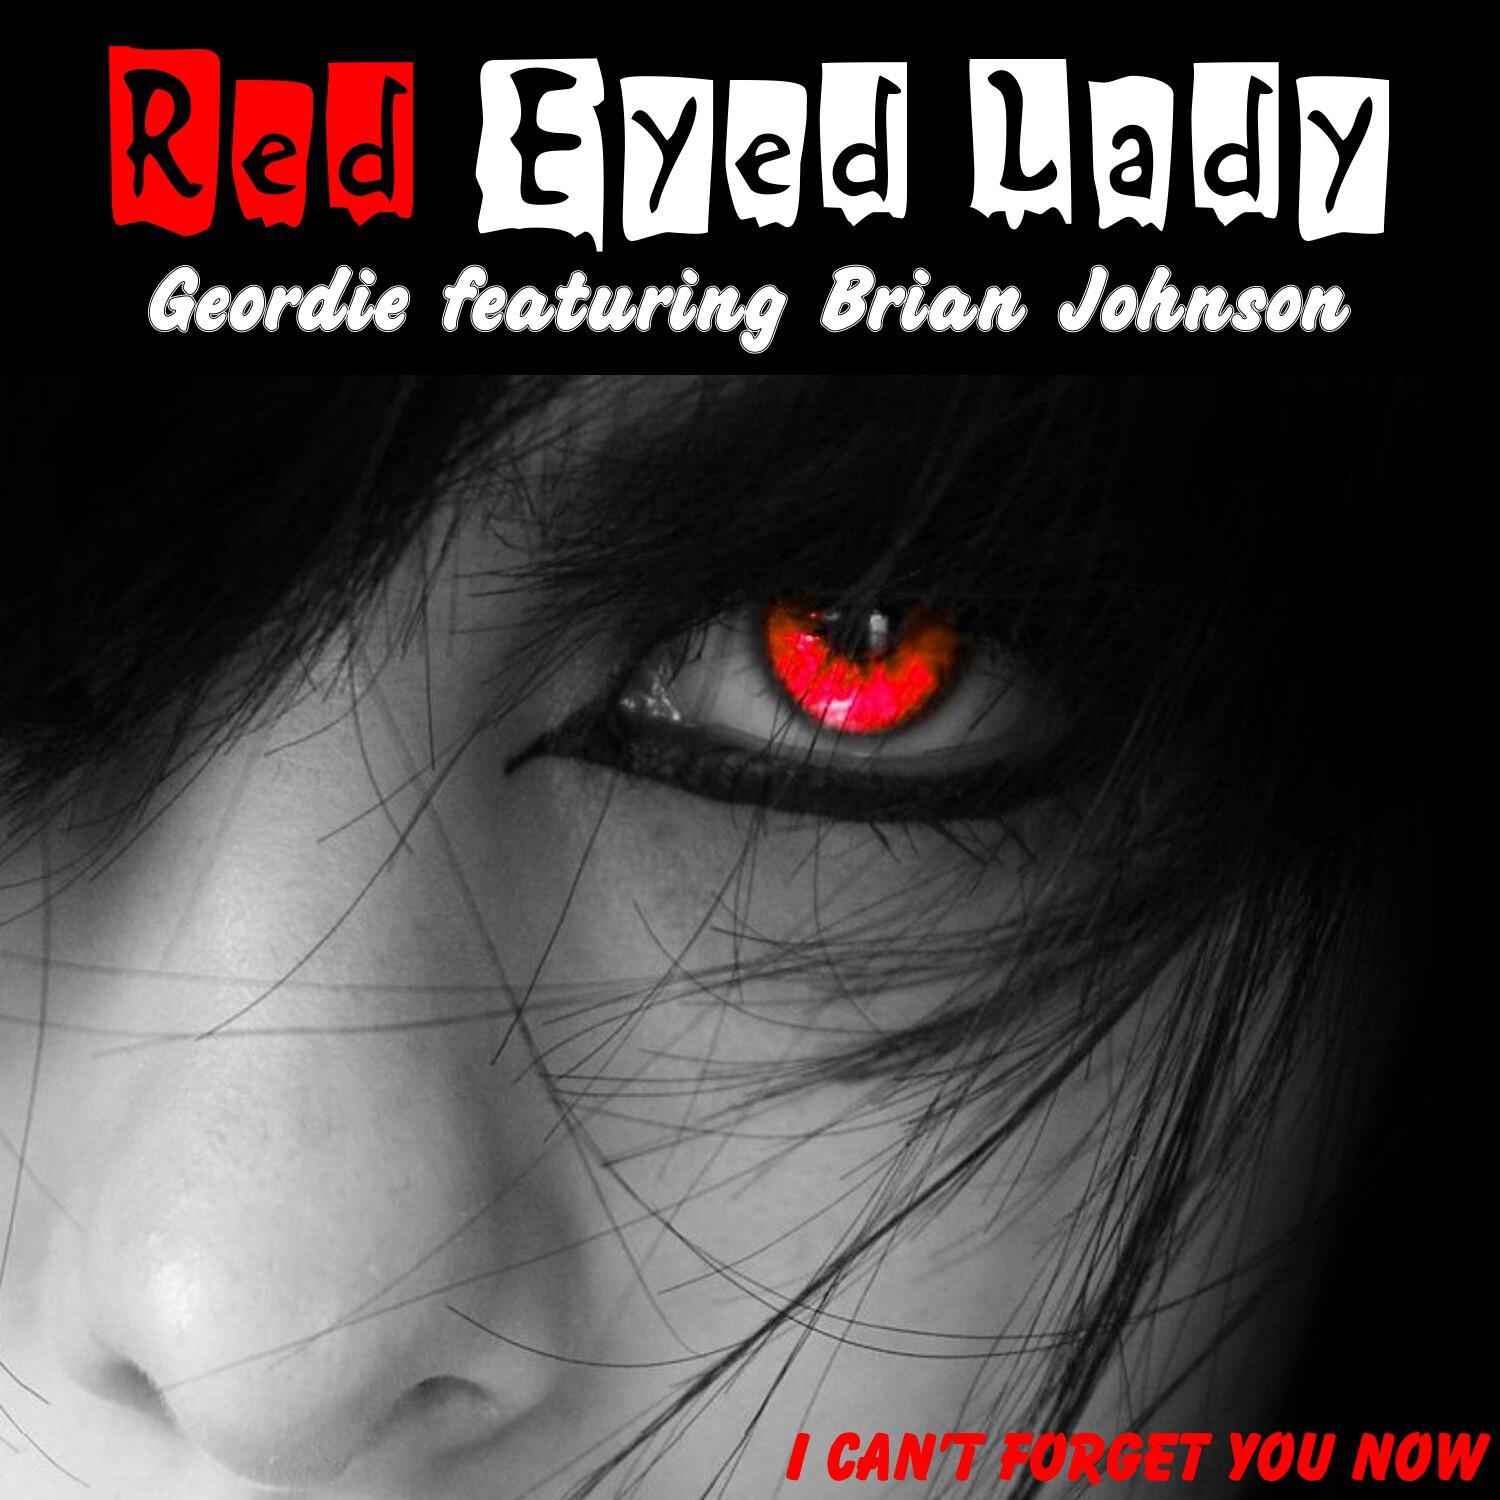 Red Eyed Lady (feat. Brian Johnson)